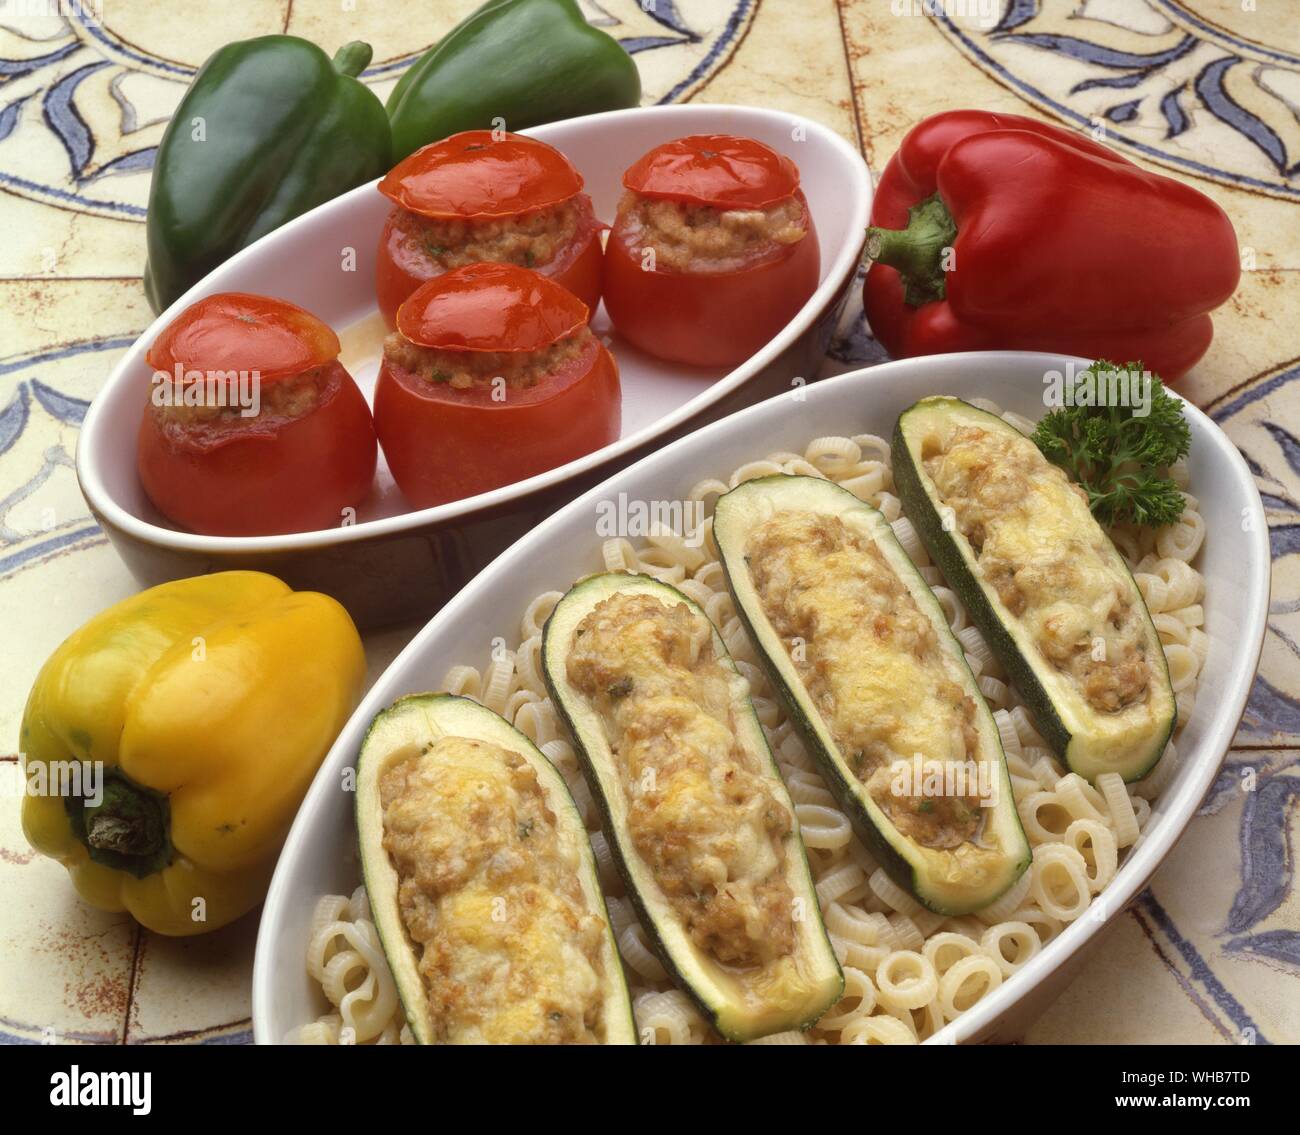 Stuffed courgettes and tomatoes. Stock Photo